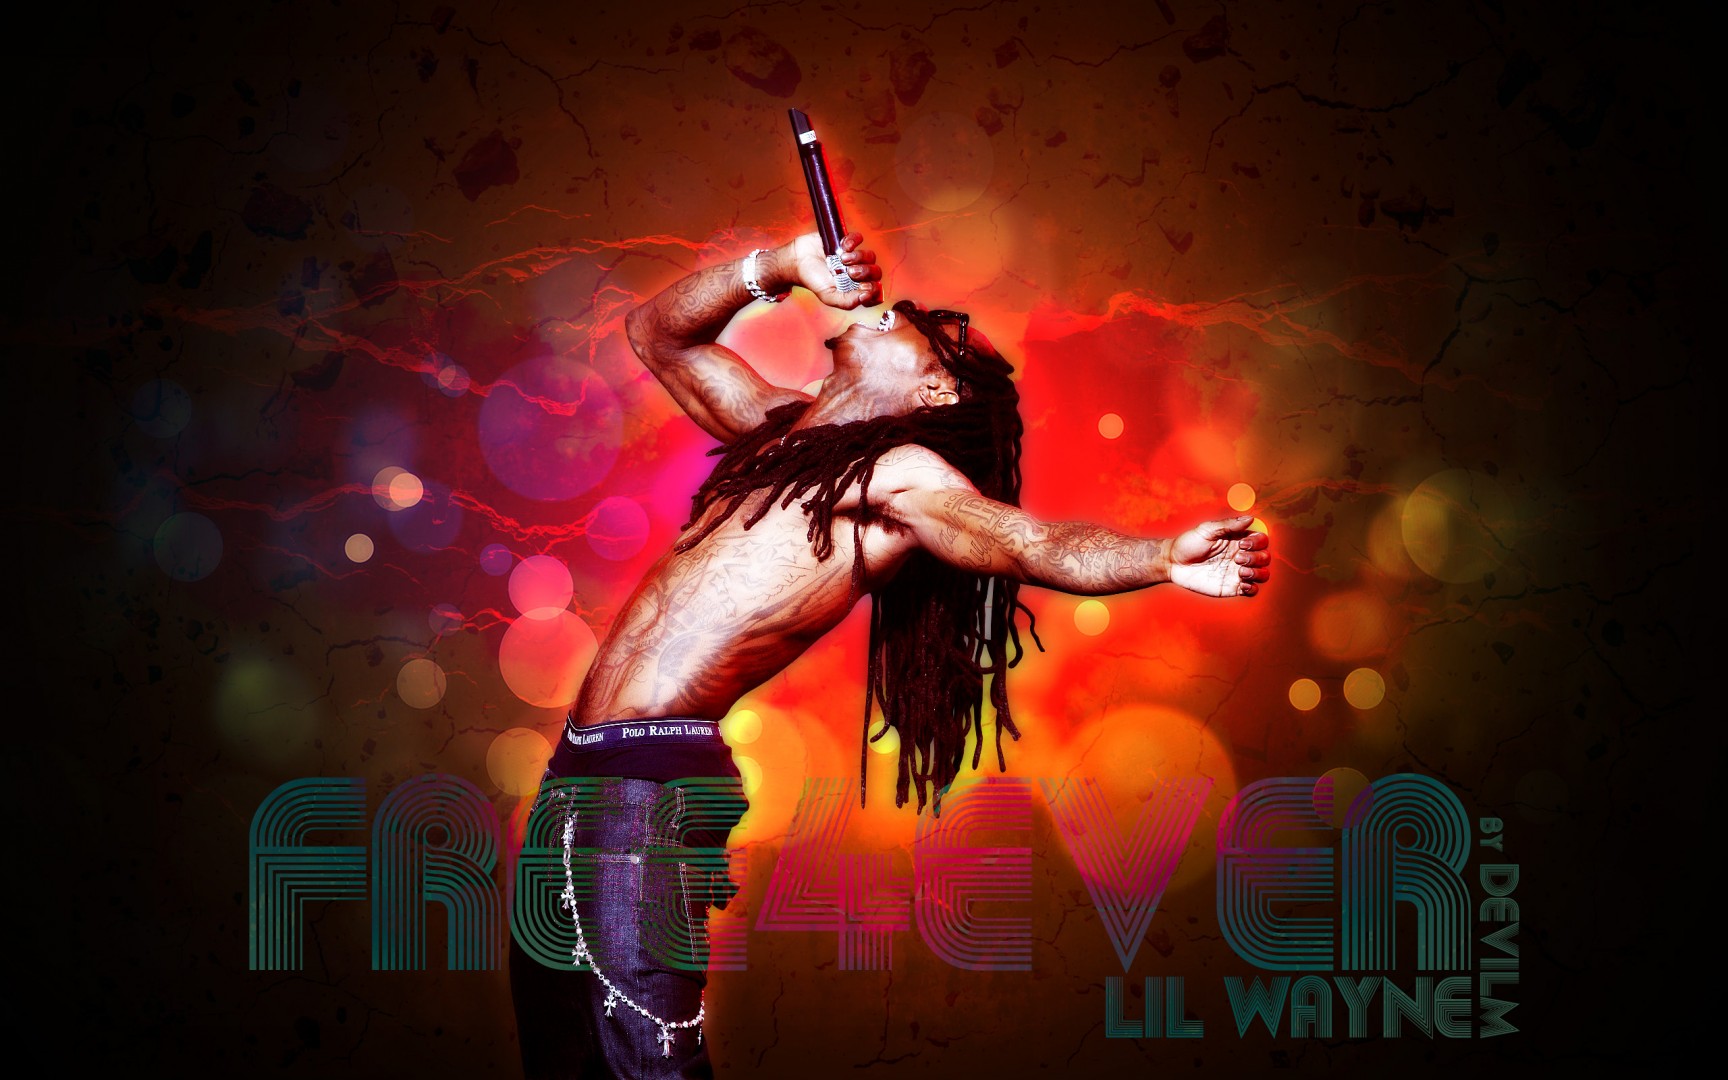 Download Lil Wayne HD 5 background for your phone iPhone android